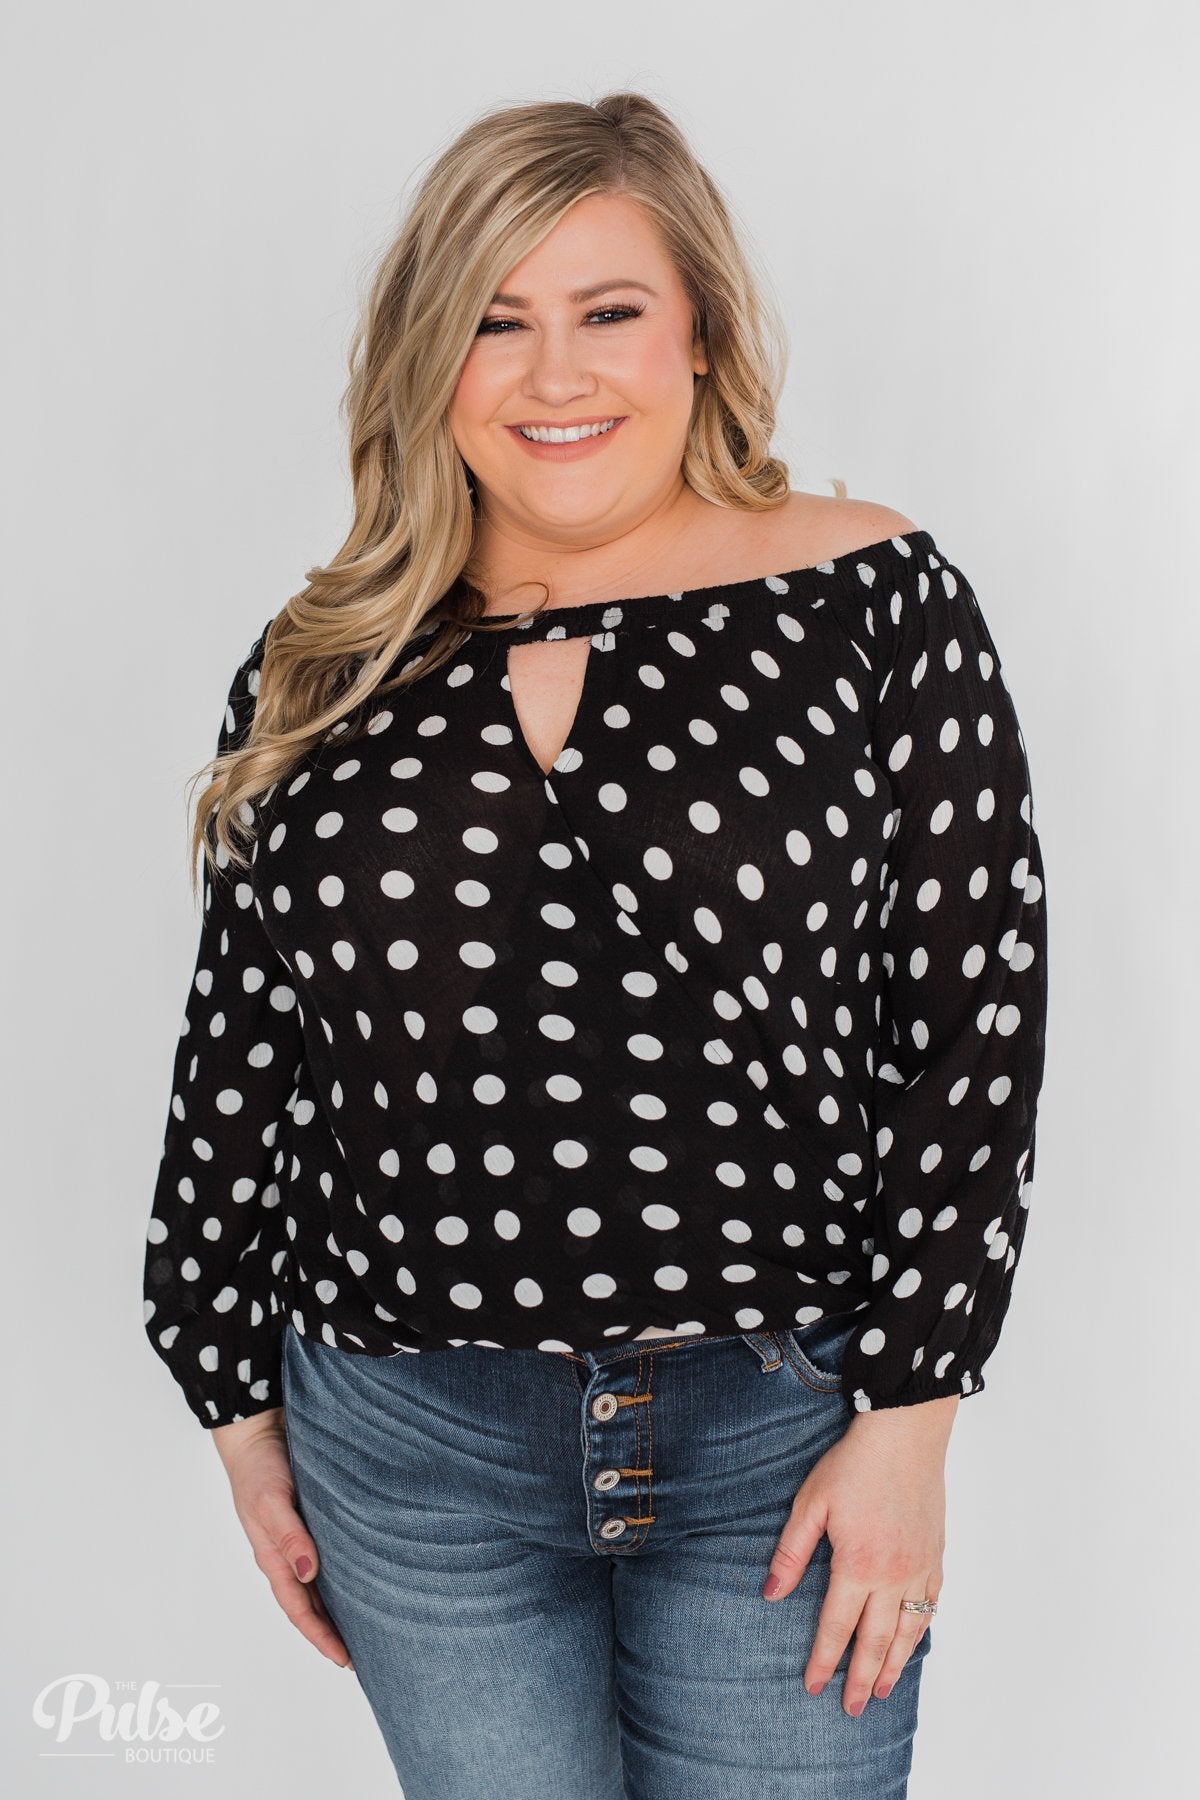 Wrapped Up In Polka Dots Off The Shoulder Blouse- Black